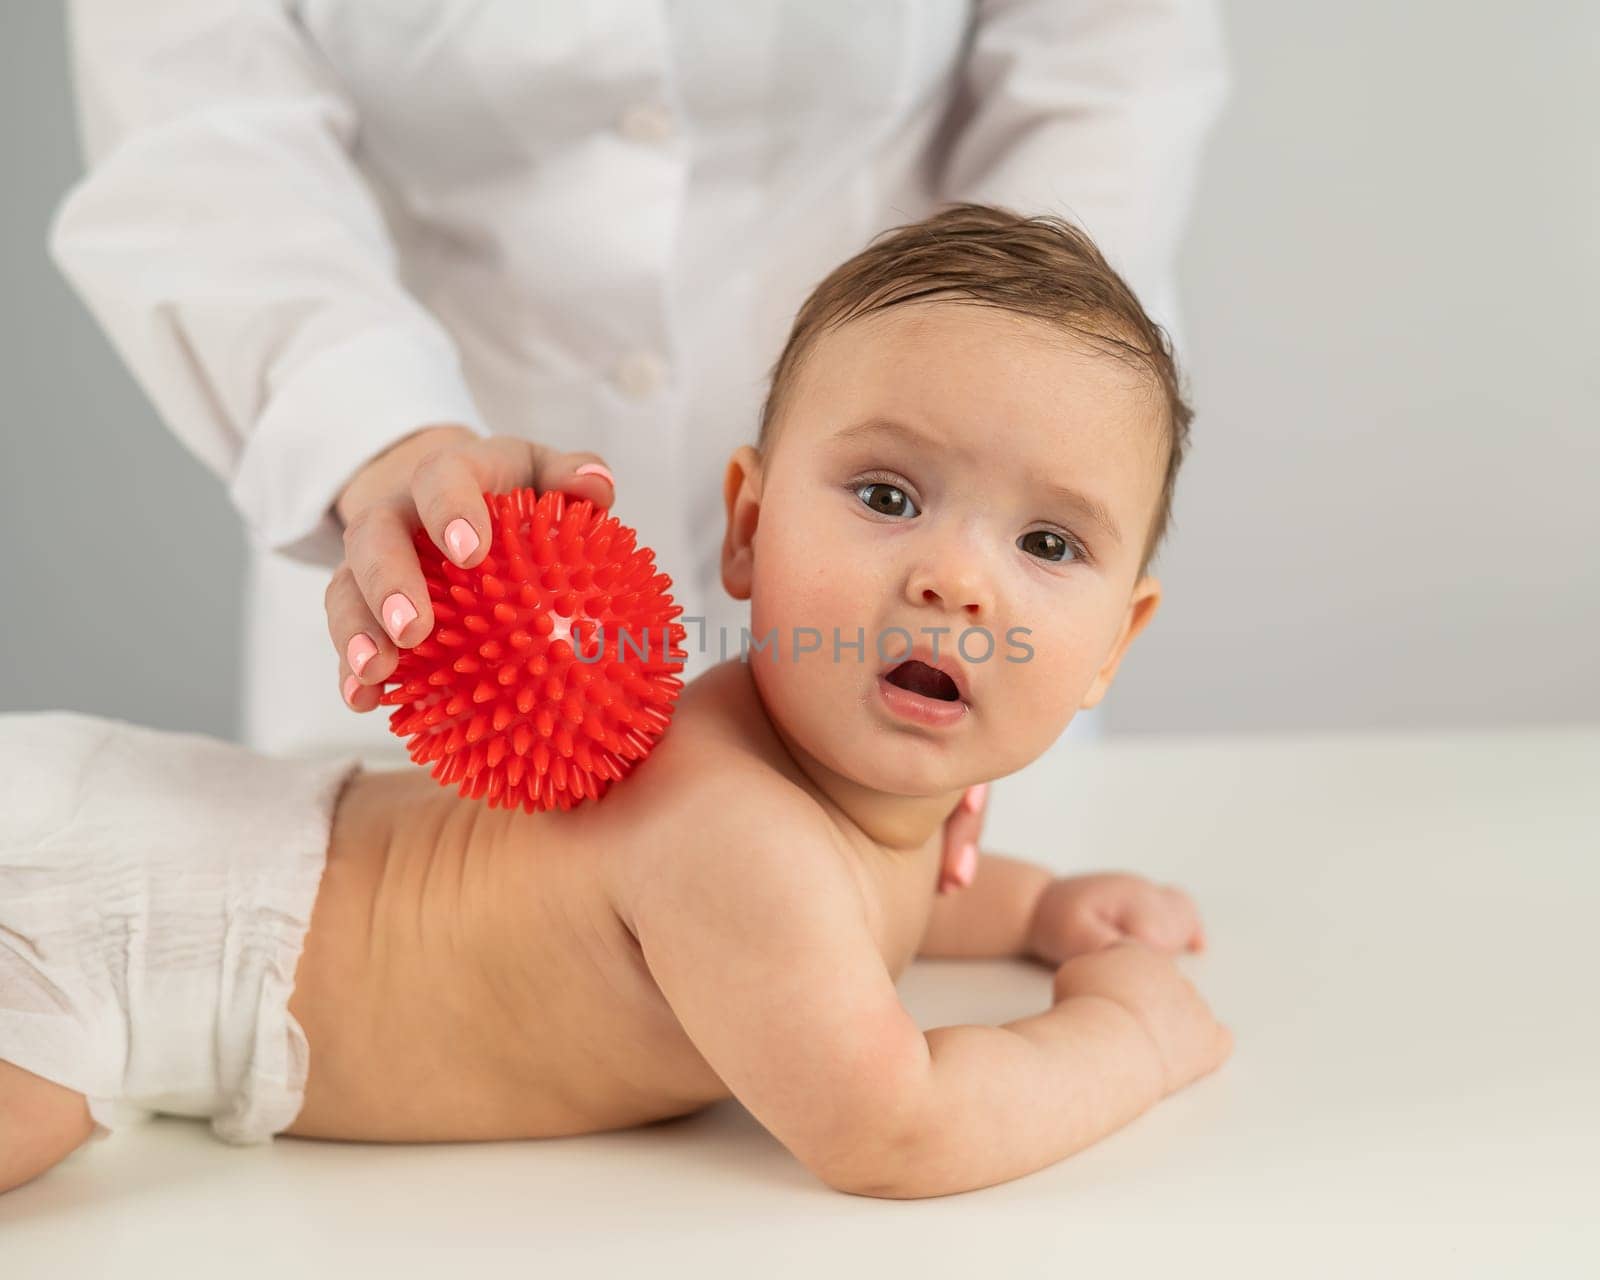 A doctor gives a child a back massage using a ball